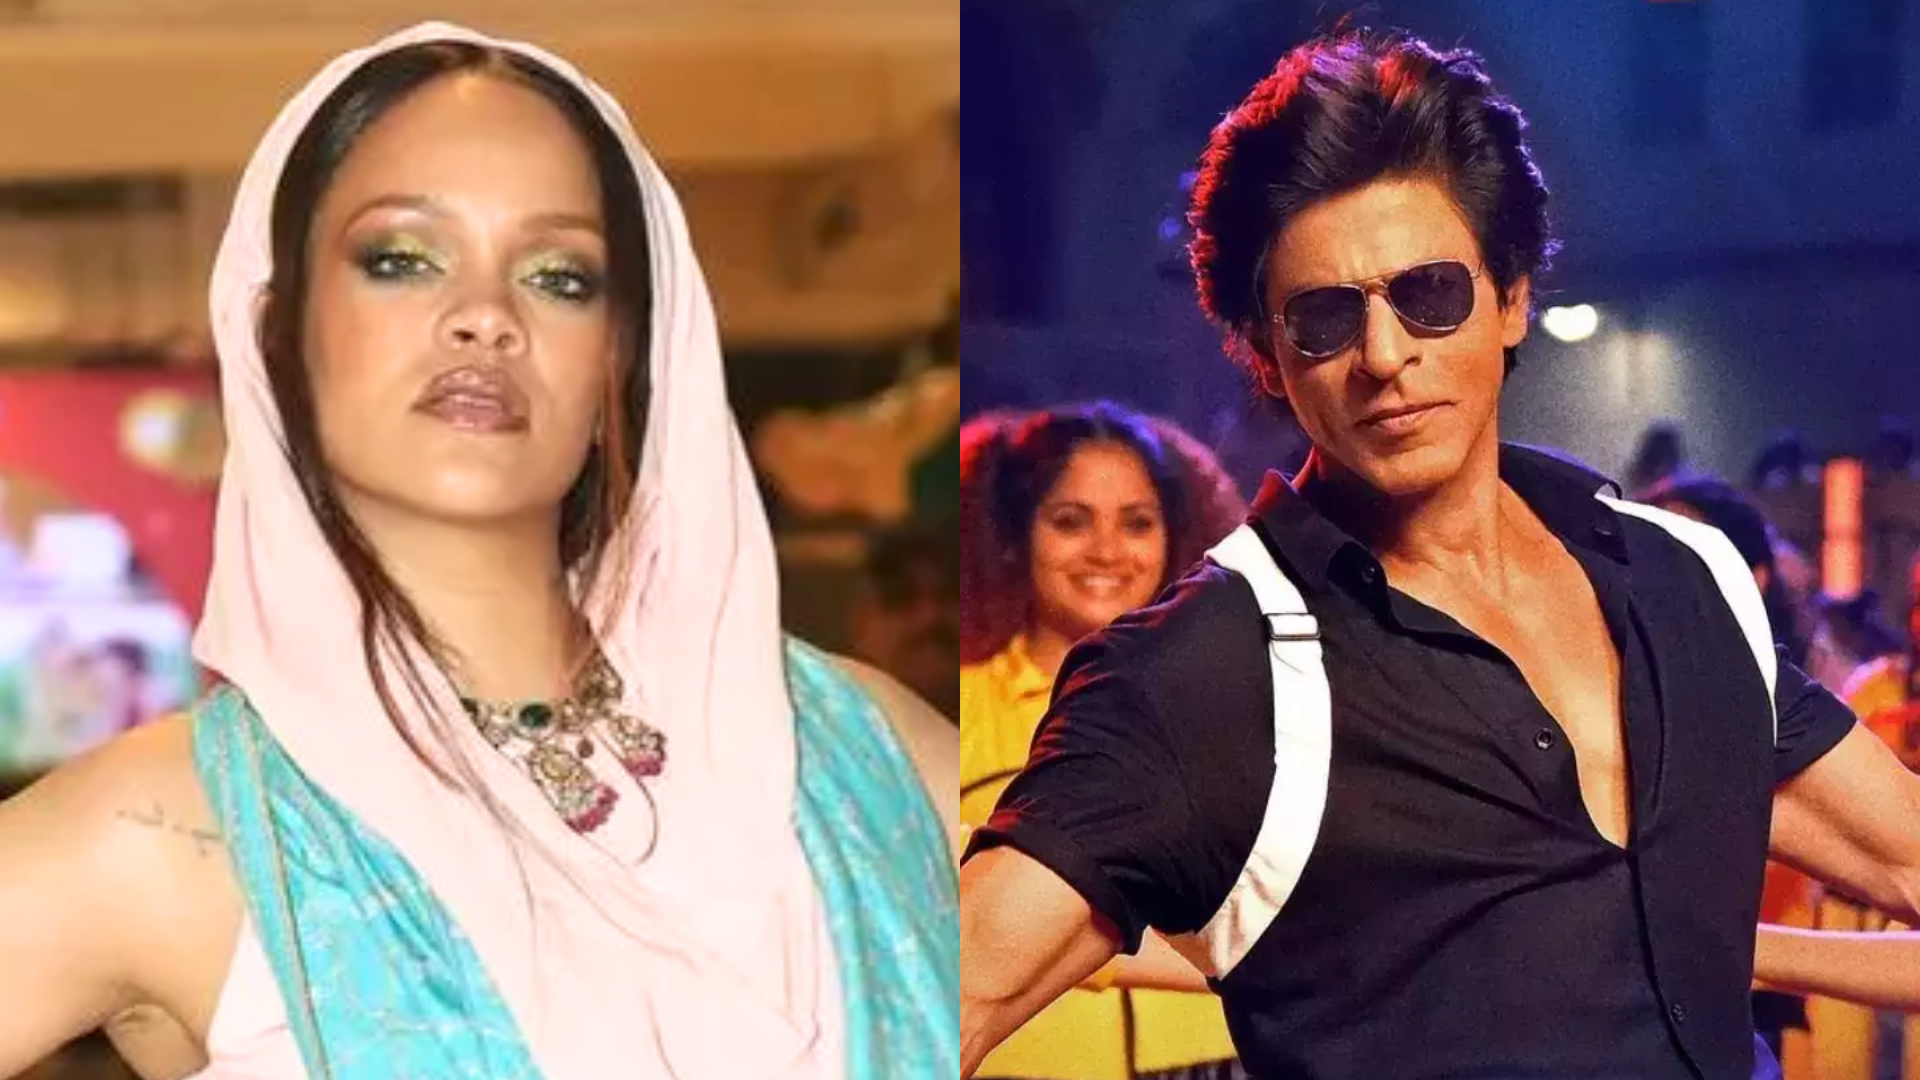 Viral: Rihanna Grooves To Shah Rukh Khan’s ‘Chaleya’ With Orry In New Clip From The Ambani Bash